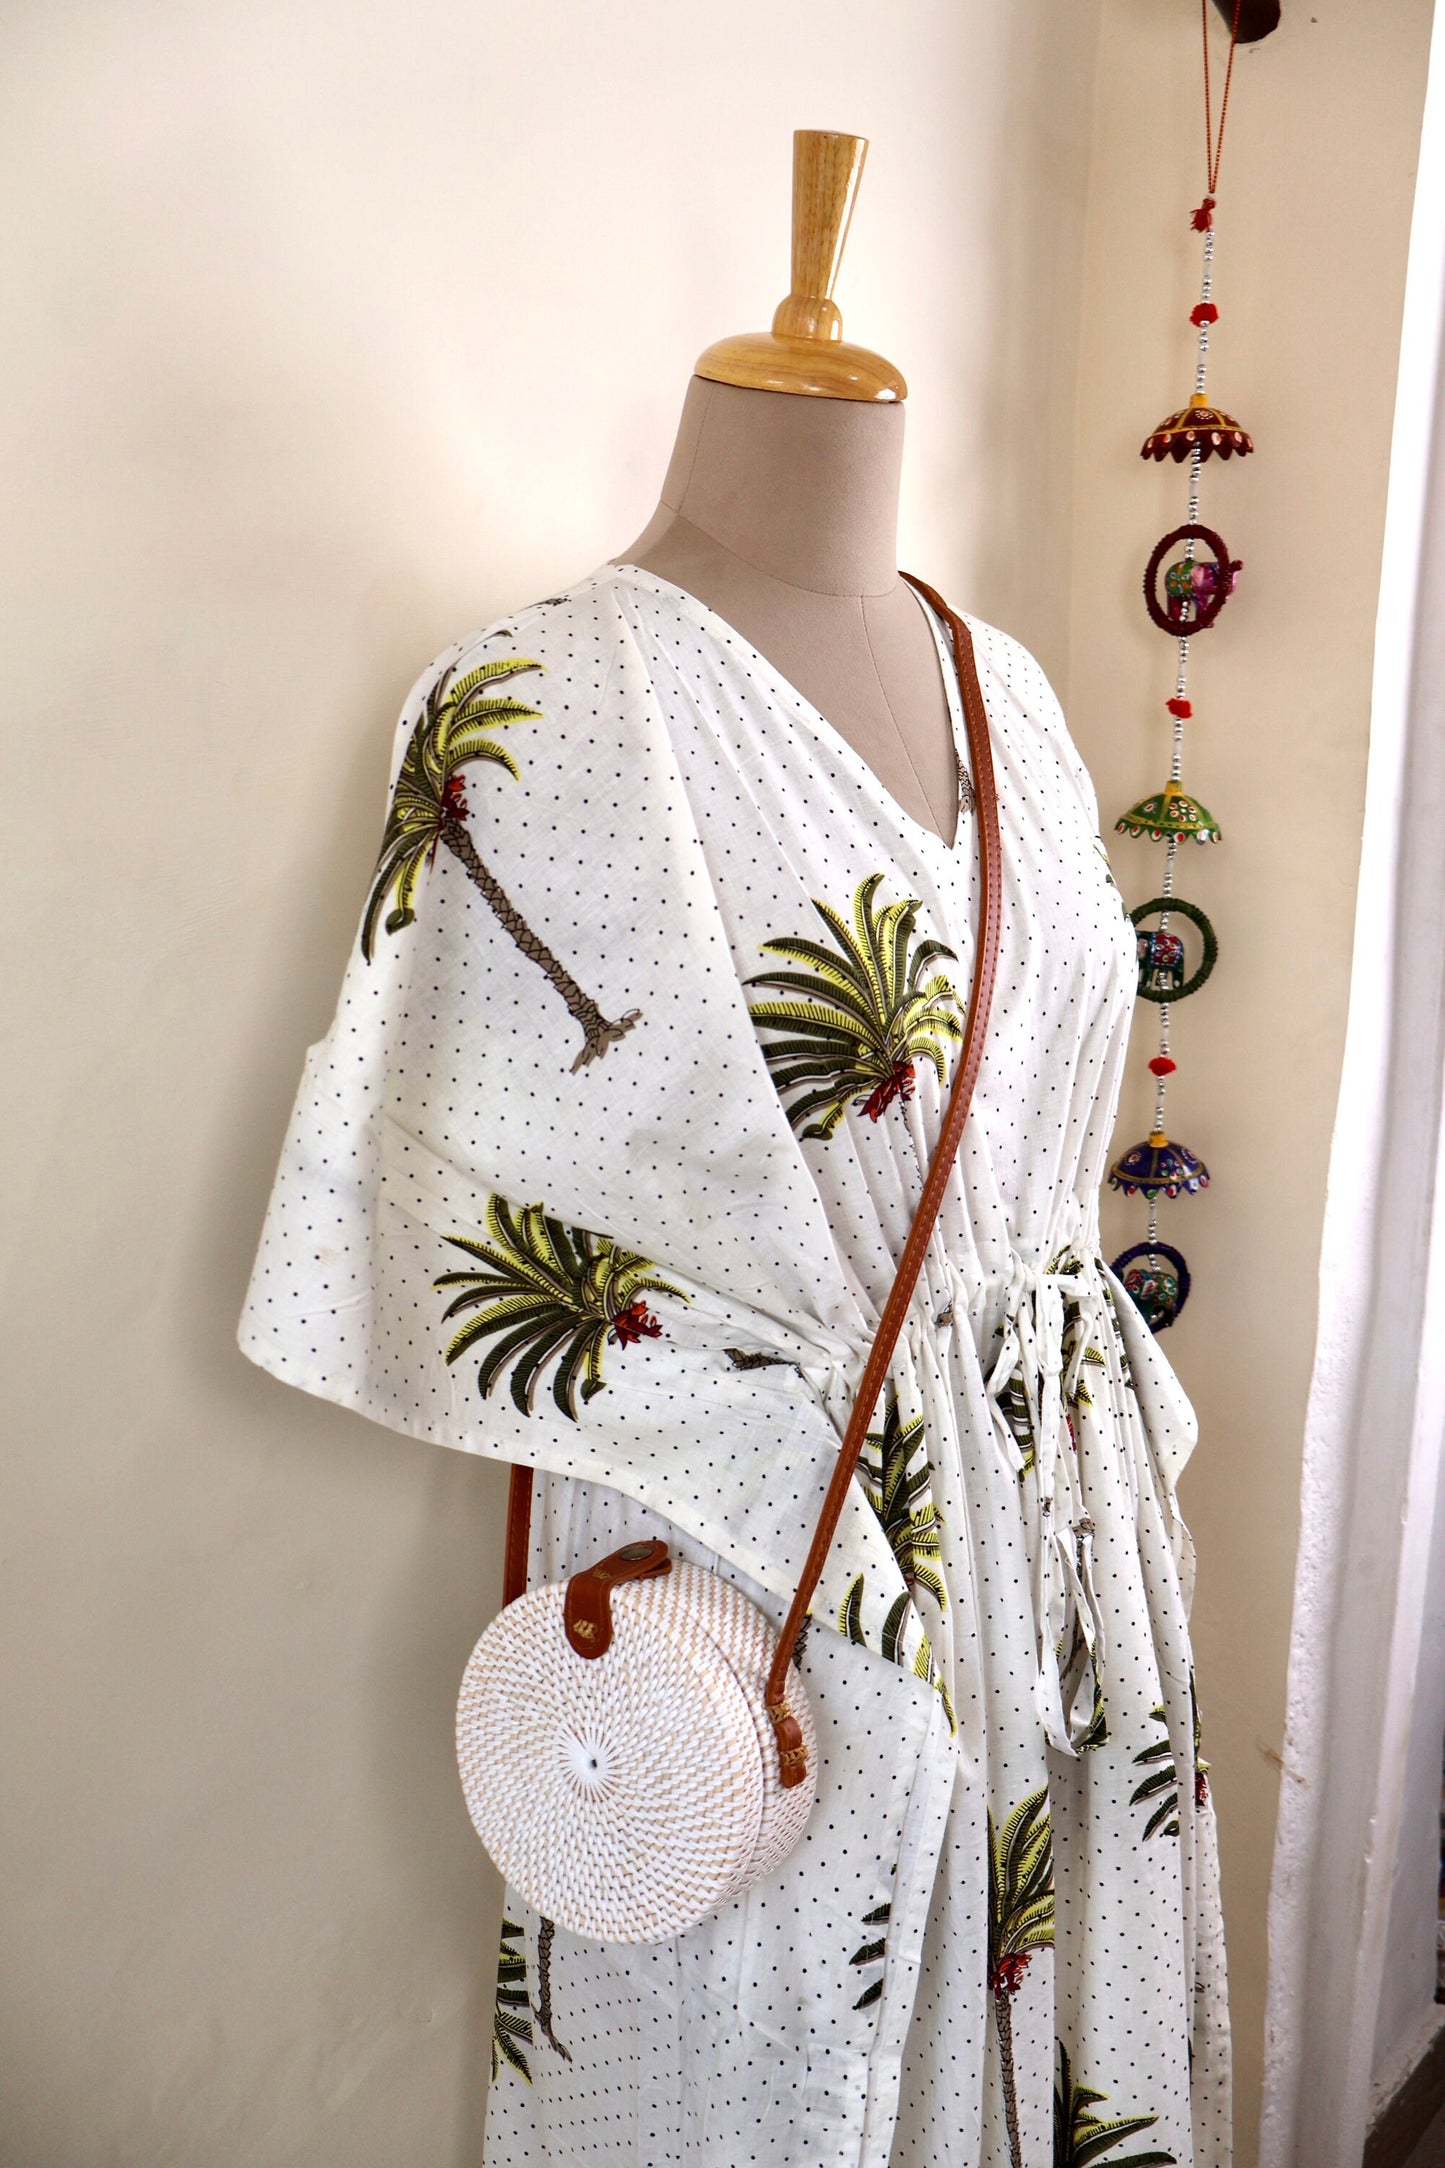 Classic Round White Rattan Bag, Bali Bags, Handwoven Crossbody Purse, Braided Straw Bag, Bali Sling Bags Rattan Bags Gift for her